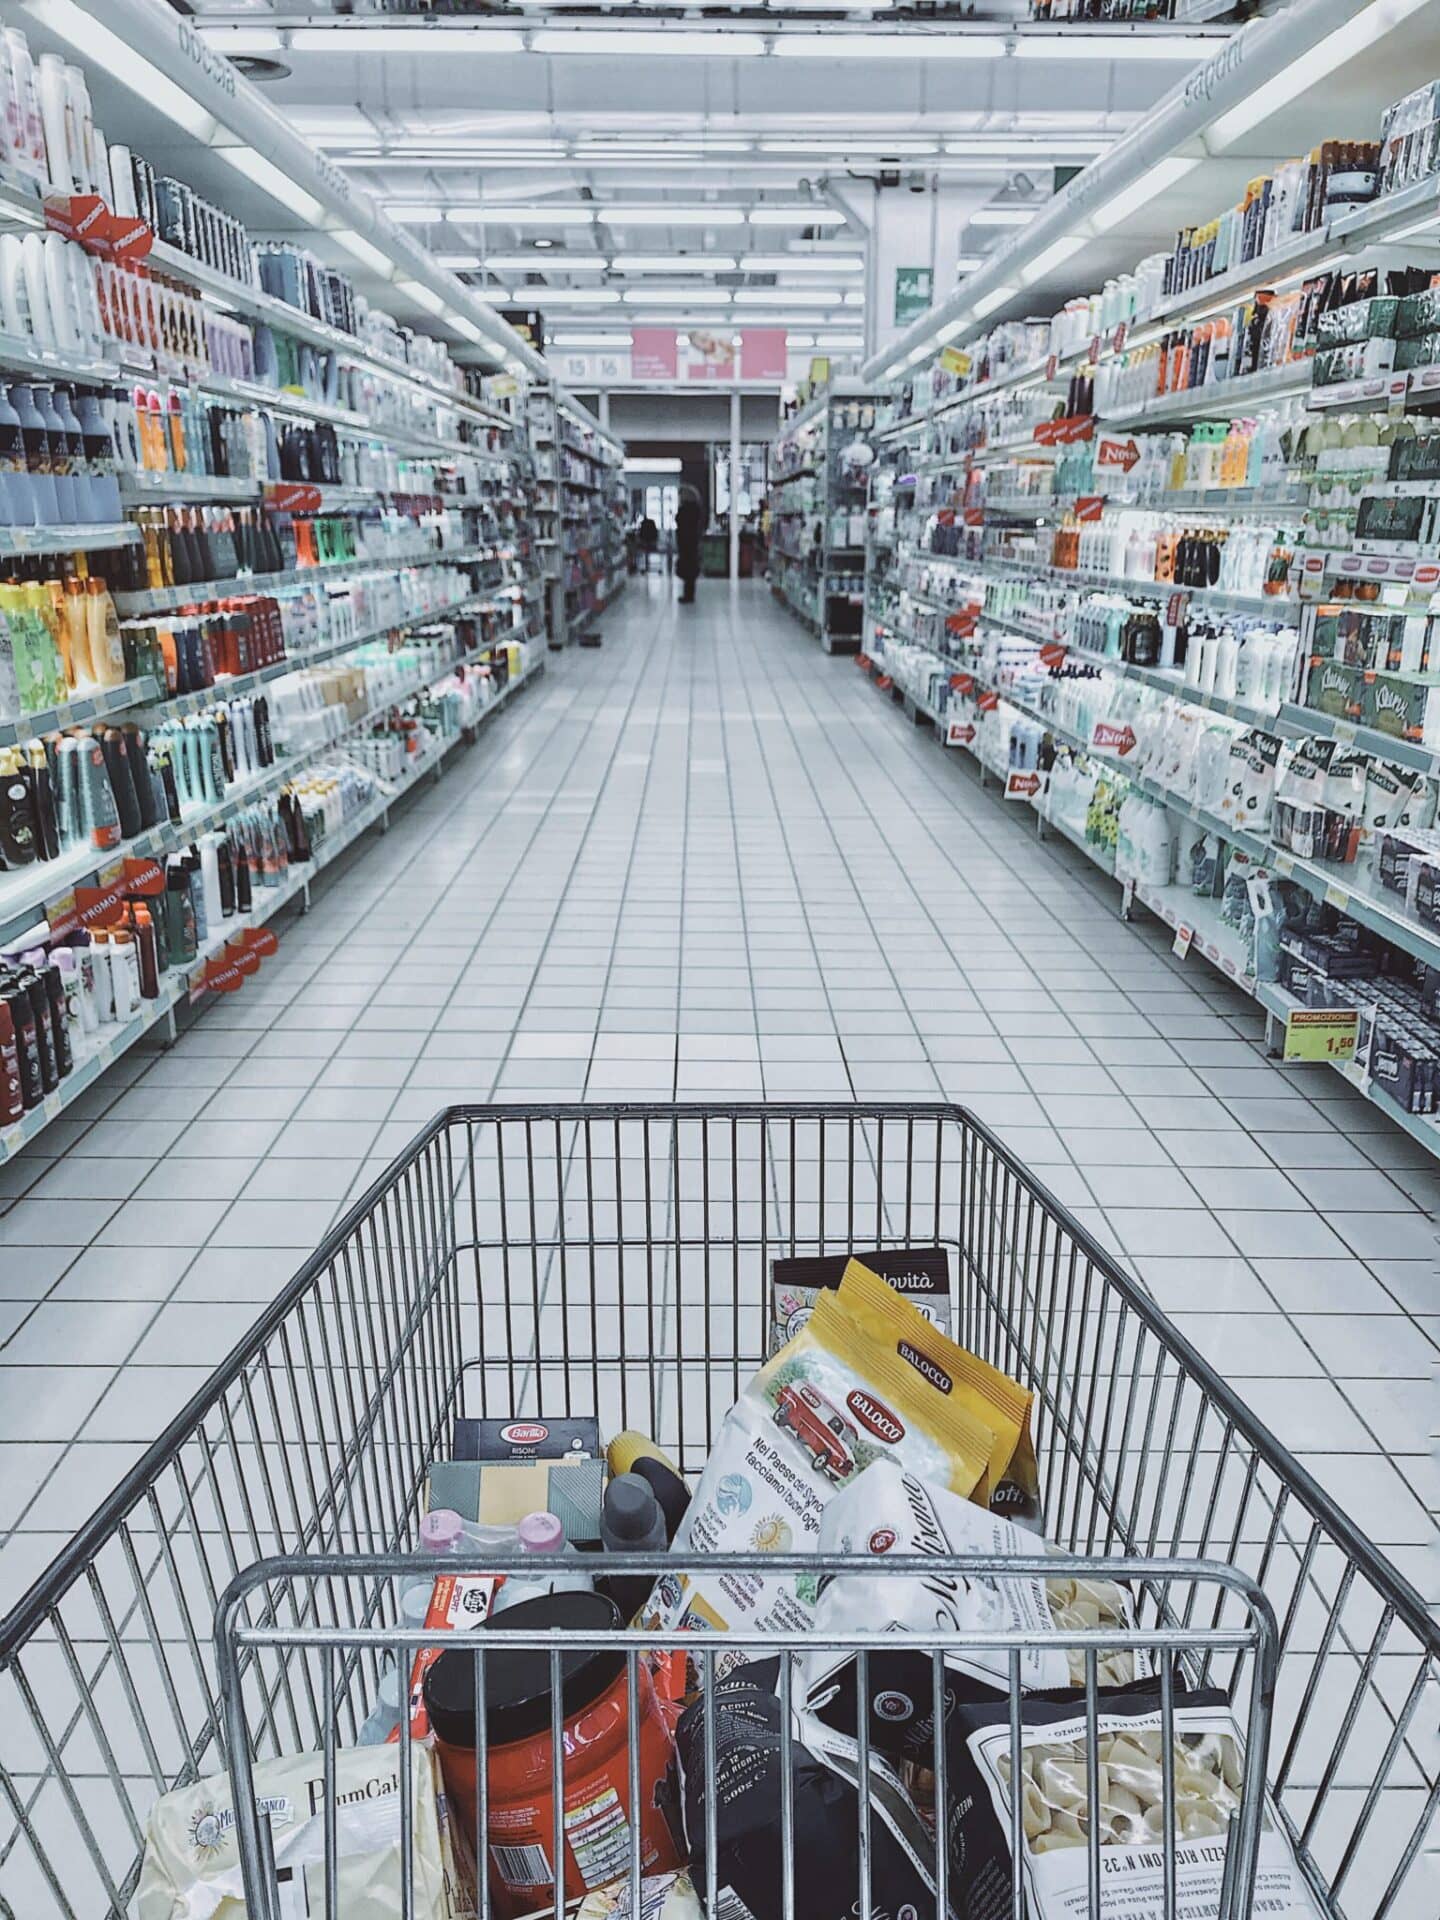 A shopping cart is filled with groceries in a supermarket aisle.